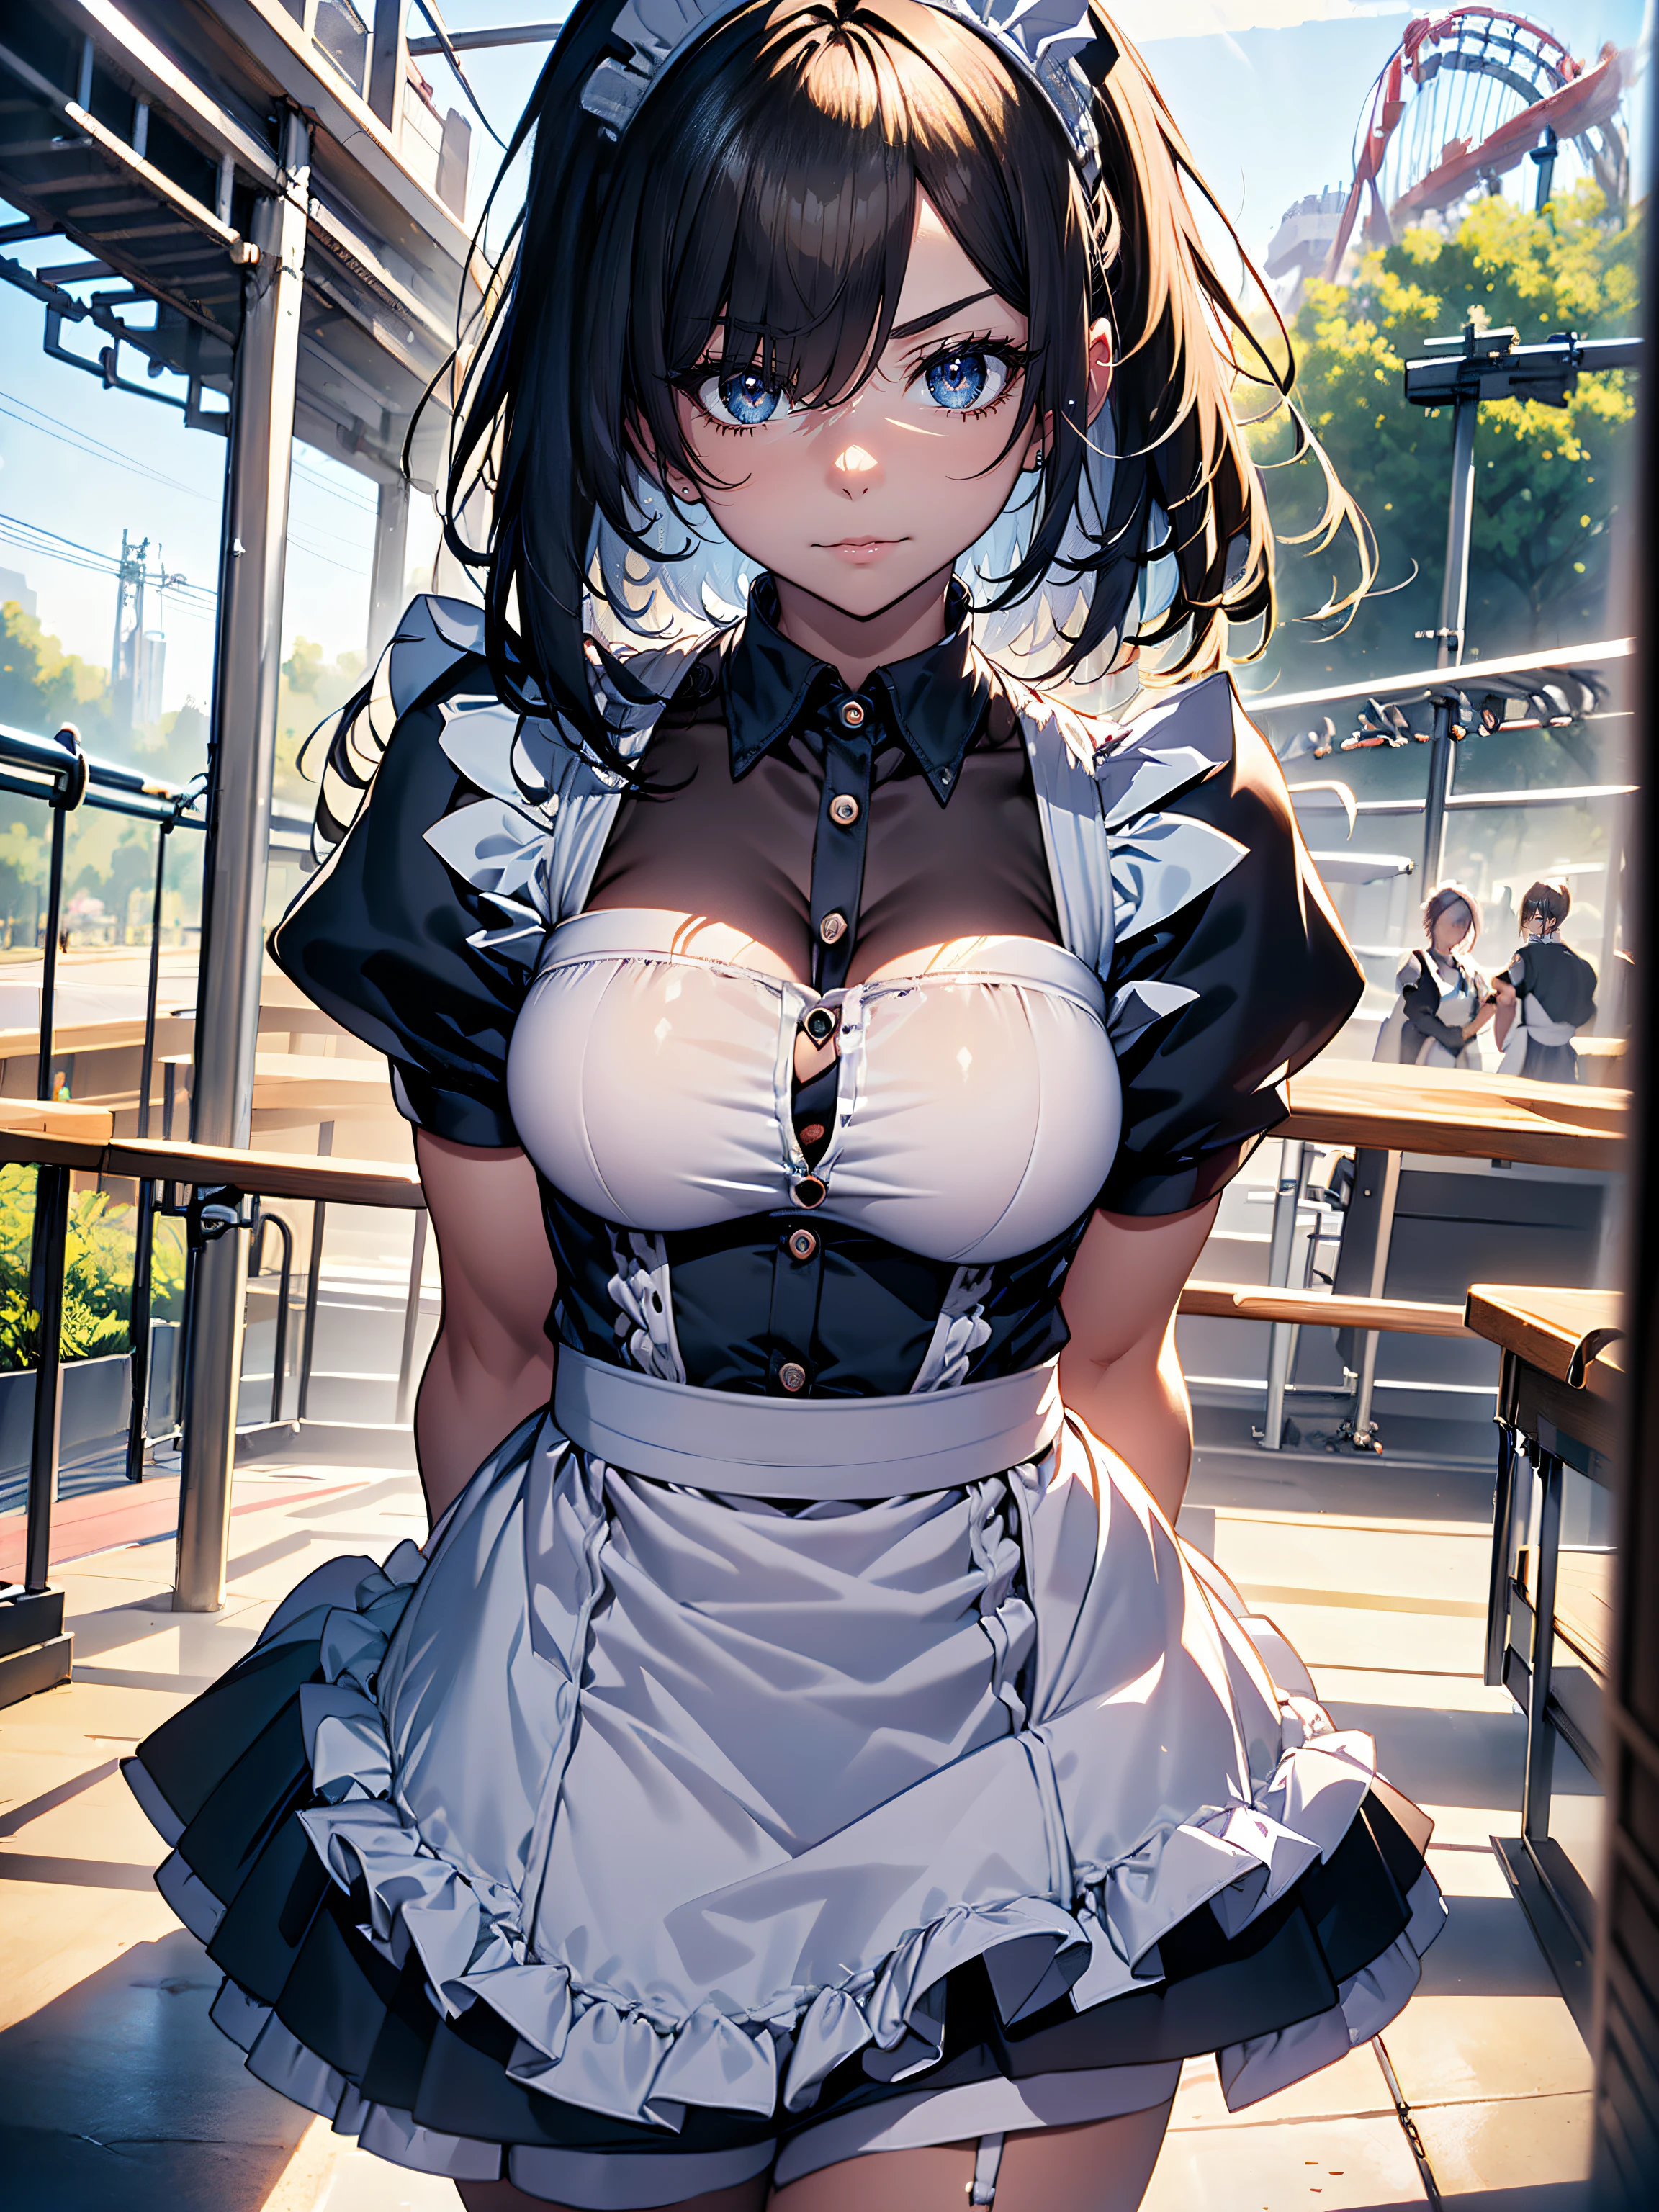 ((maid clothes)),hiquality, hight resolution, ultra-detailliert, high-level image quality, hightquality, anime illustrated, (finely detailed beautiful eye: 1.2), Detailed eye depiction, (finely detailed  eyes and detailed face:1.3), (extremely details CG, Best Shadow:1.1), Depth of field and blur, (Perfect Detail: 1.1) , digitial illustration, Enamel Art, Center, Watercolor painting, art  stations, concept-art, character sheets, Lightning Wave, beautiful anime watercolors, Vibrant colors, Sharp Focus, art by:hyung tae kim, Fine detail, intricate detailes, Curvaceous body, Detailed eye depiction, Vibrant colors,((Nervous look before riding a roller coaster))